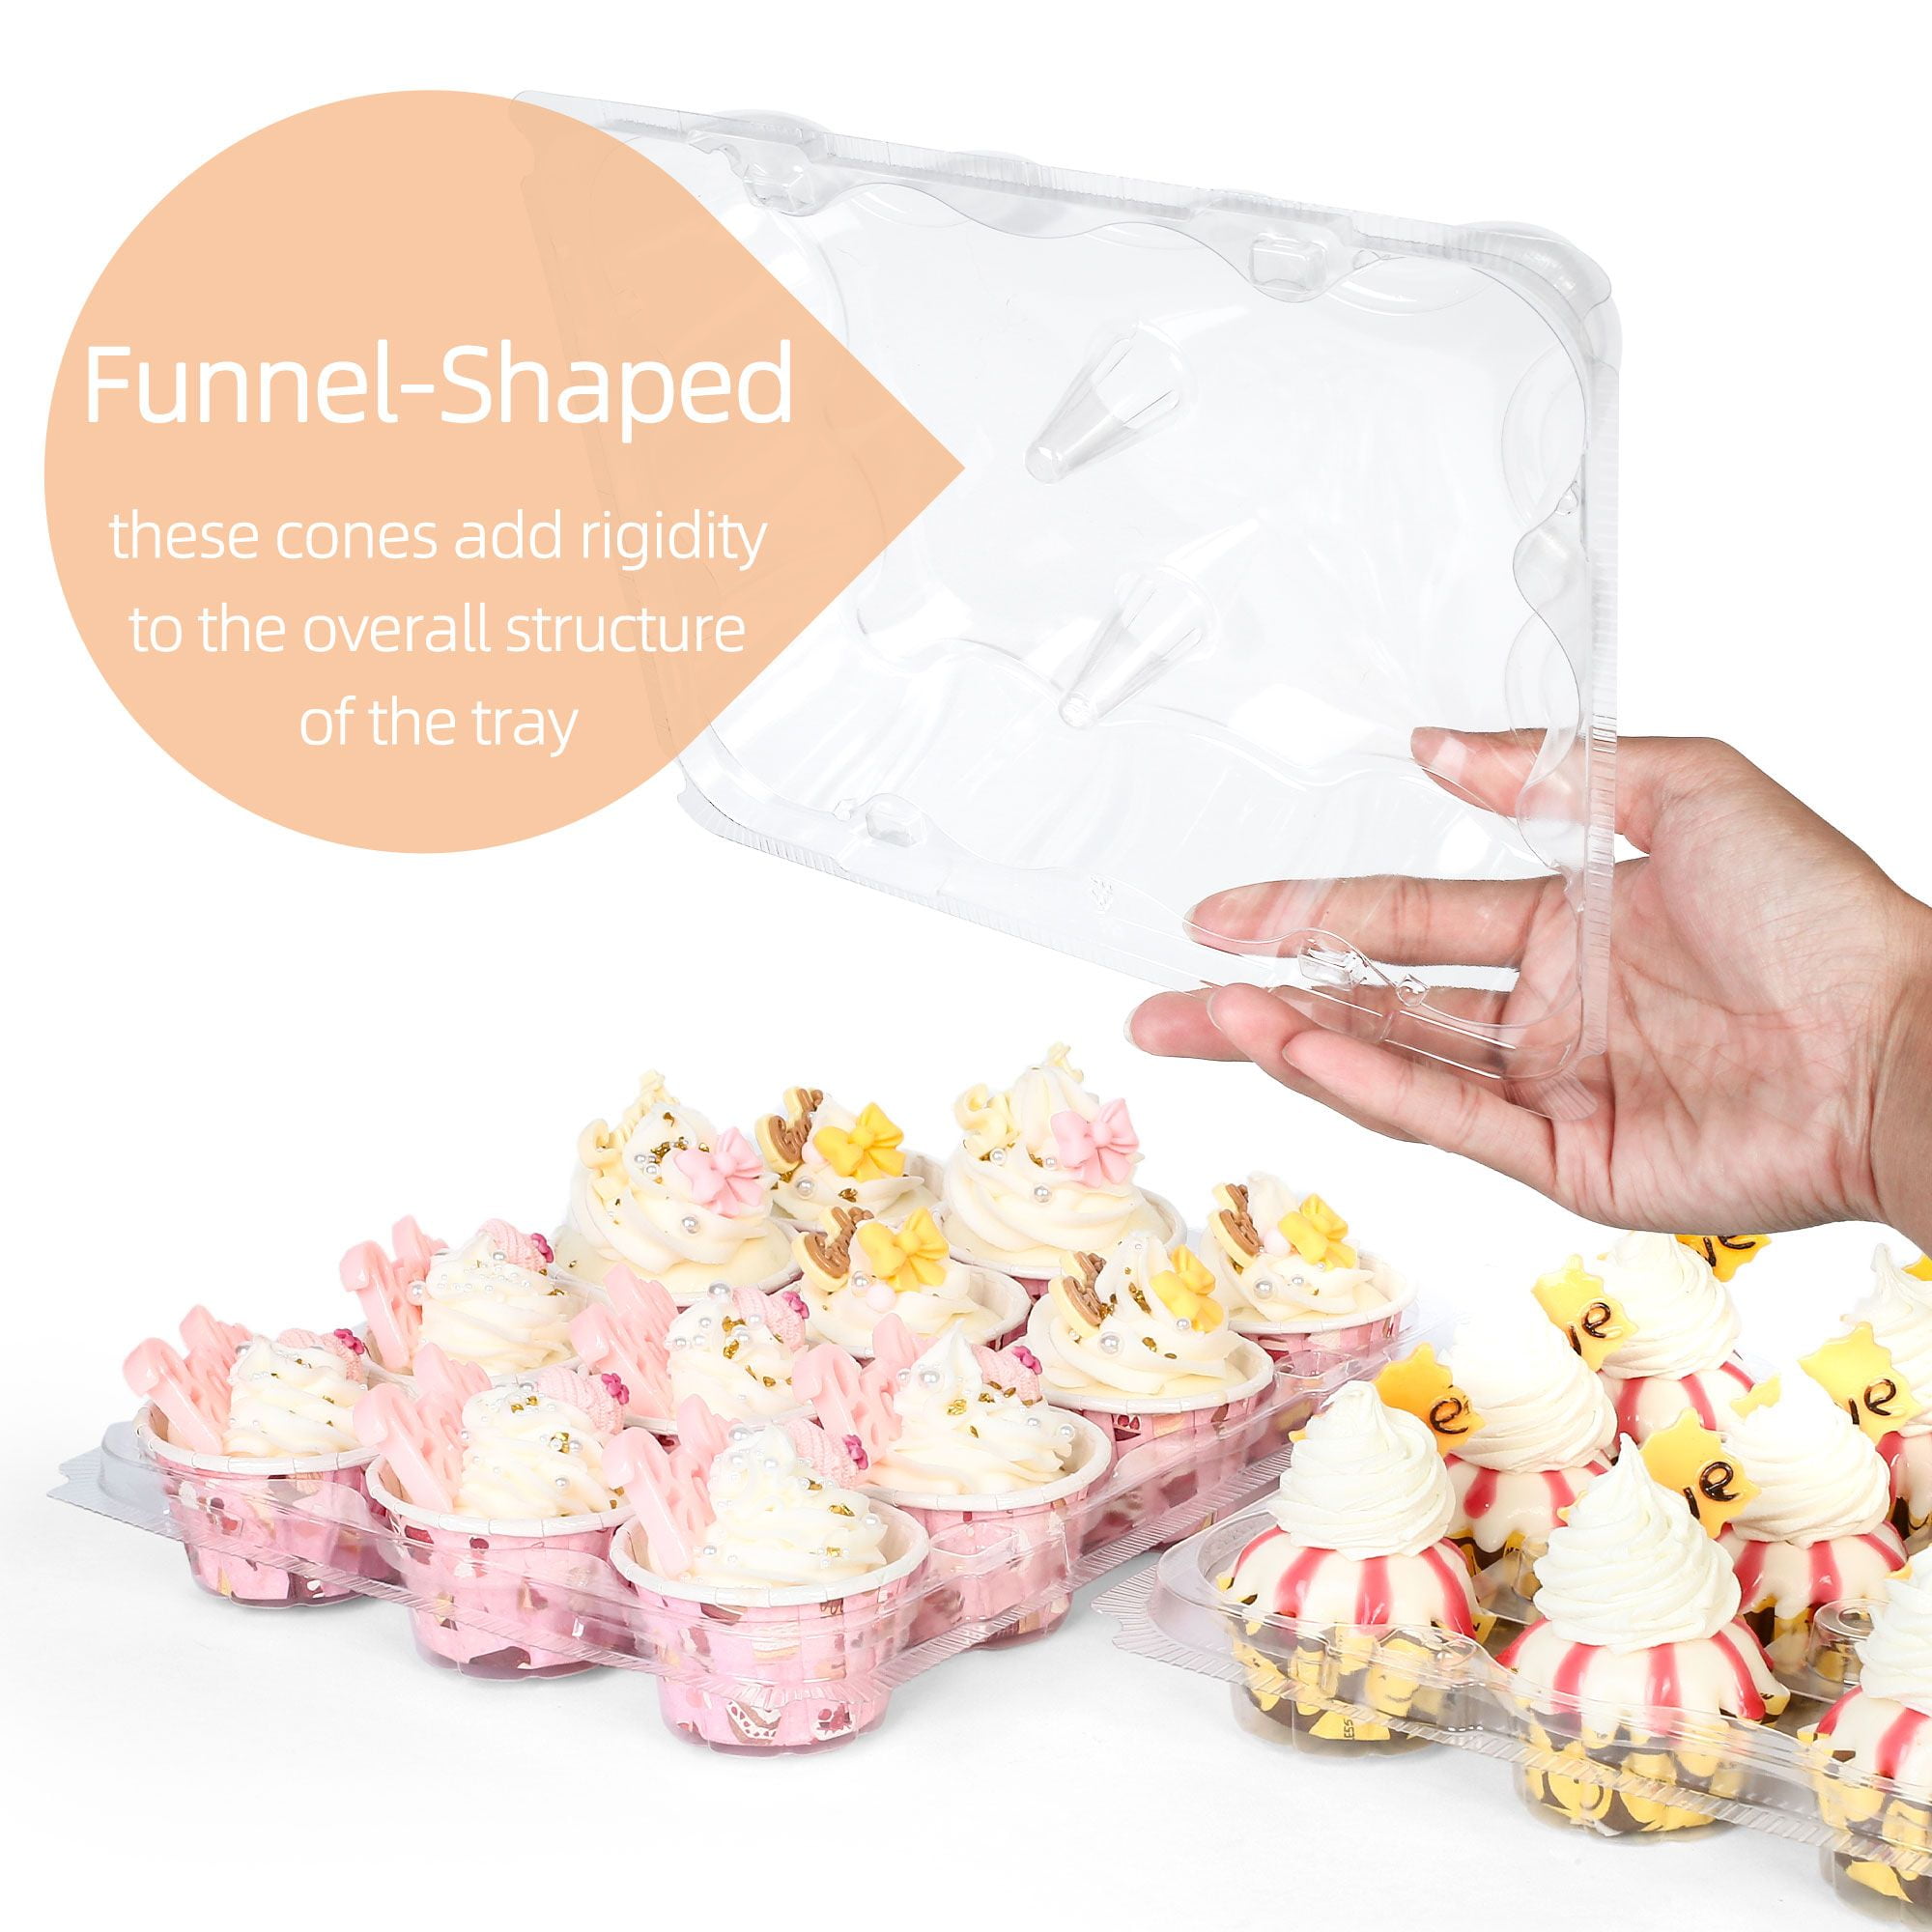 5 – 24 Compartment Clear High Dome Cupcake Containers Boxes with baking cup  liners – Great for high topping – 5 boxes 24 slot each – Plus White standard  size baking cups – Decony